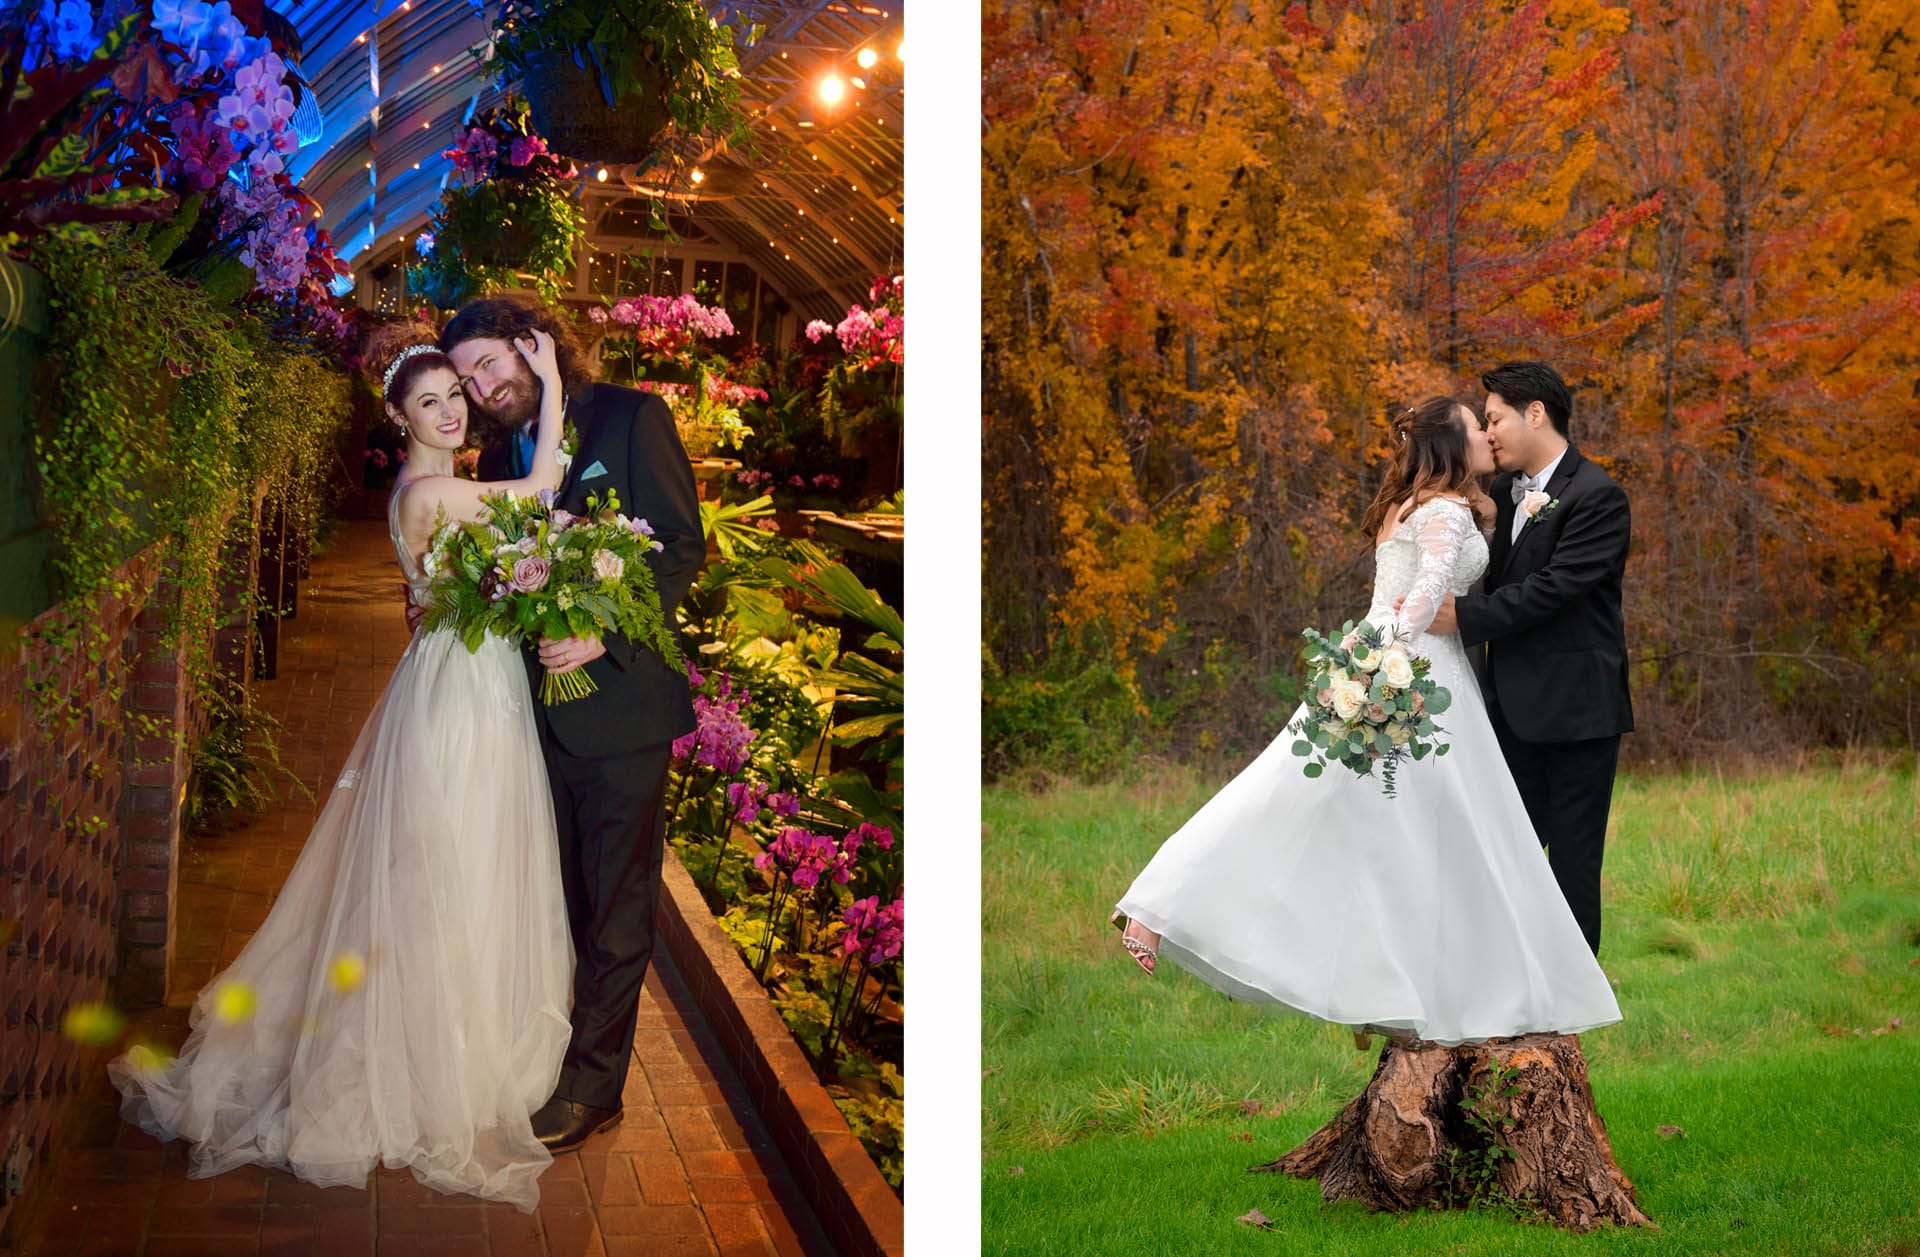 A couple snuggles at Phipp's Conservatory in Pittsburgh for their winter wedding, while a different couple stands on a created stump for this amazing fall photo created at Addison Oaks in Leonard, Michigan.